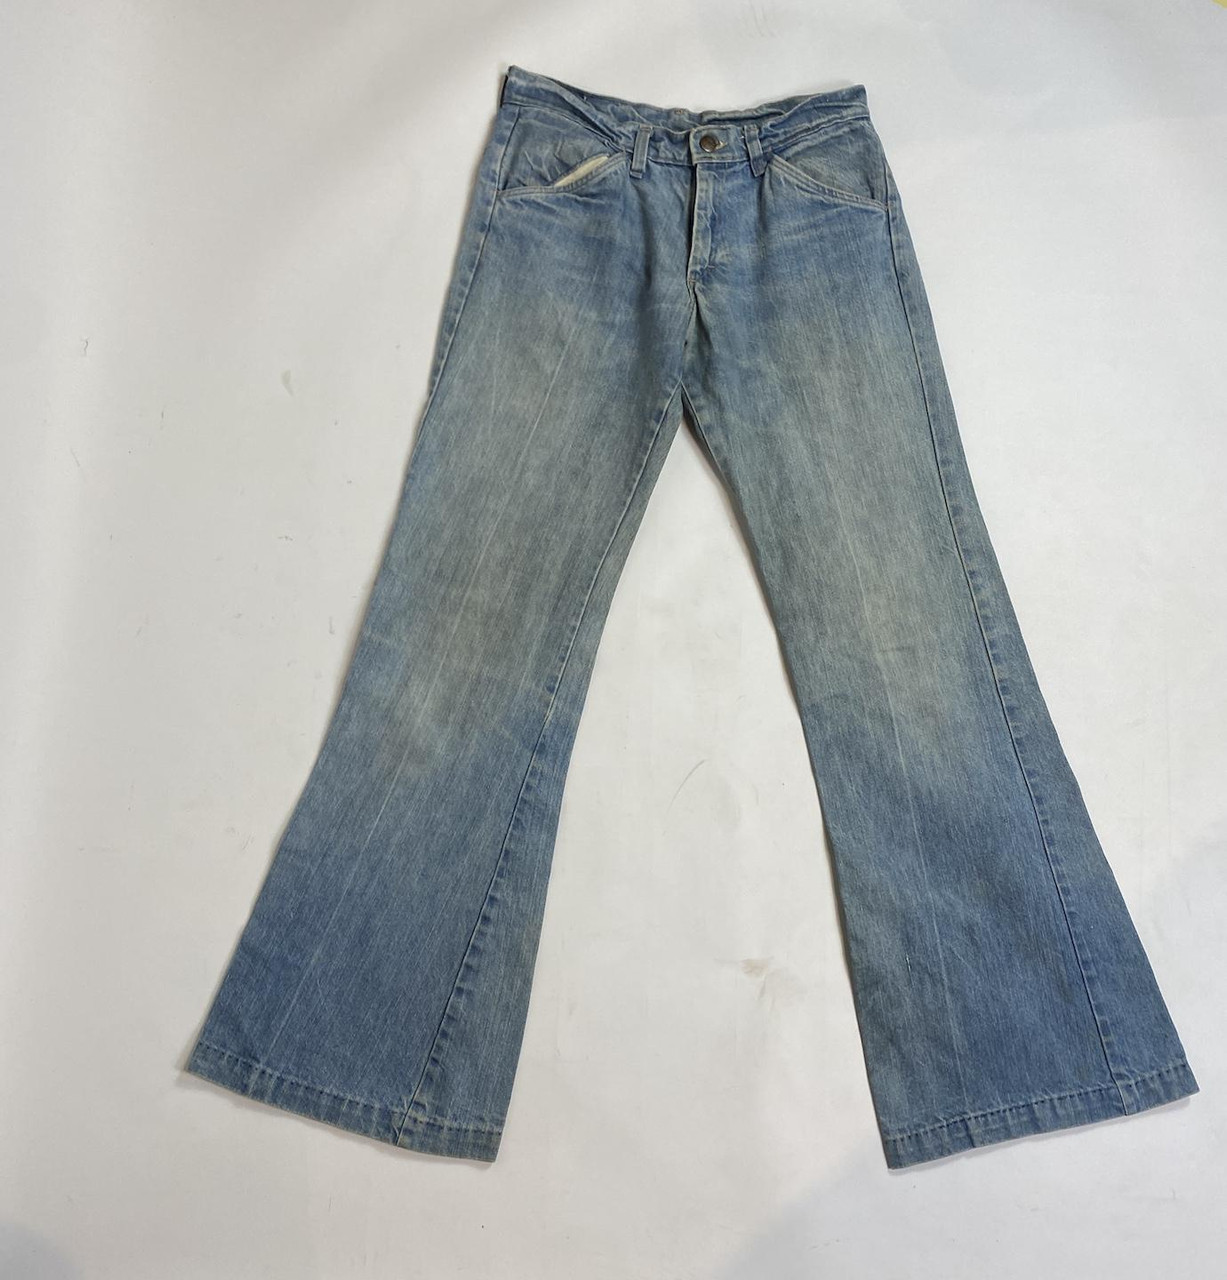 Bell-Bottoms trousers 1970s - Vintage pants flares jeans 60s - sixties  fashion clothes